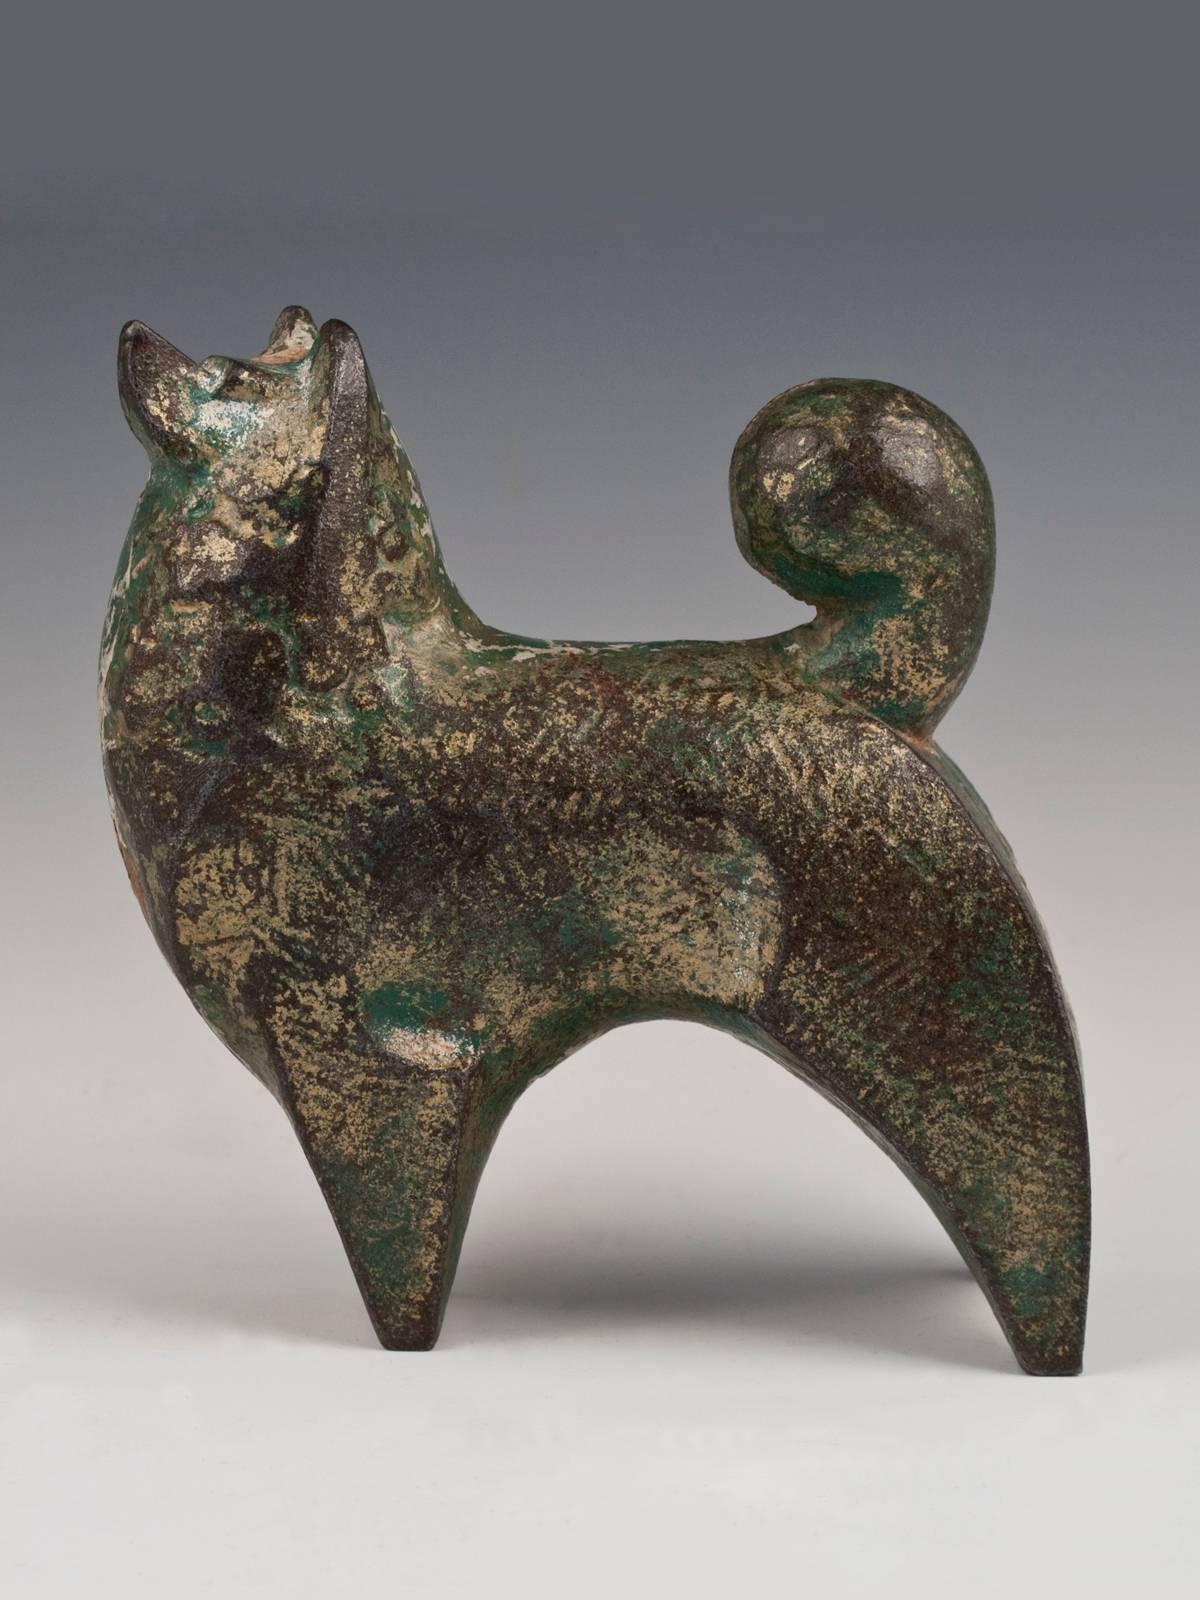 Offered by ZENA KRUZICK
Mid-Century Modern Akita Dog Okimono Sculpture, Japan

Last year, a small group of cast iron animals was found in a burlap bag in a rural peddler's one-room home in Southwest China. Because of the language barrier, no